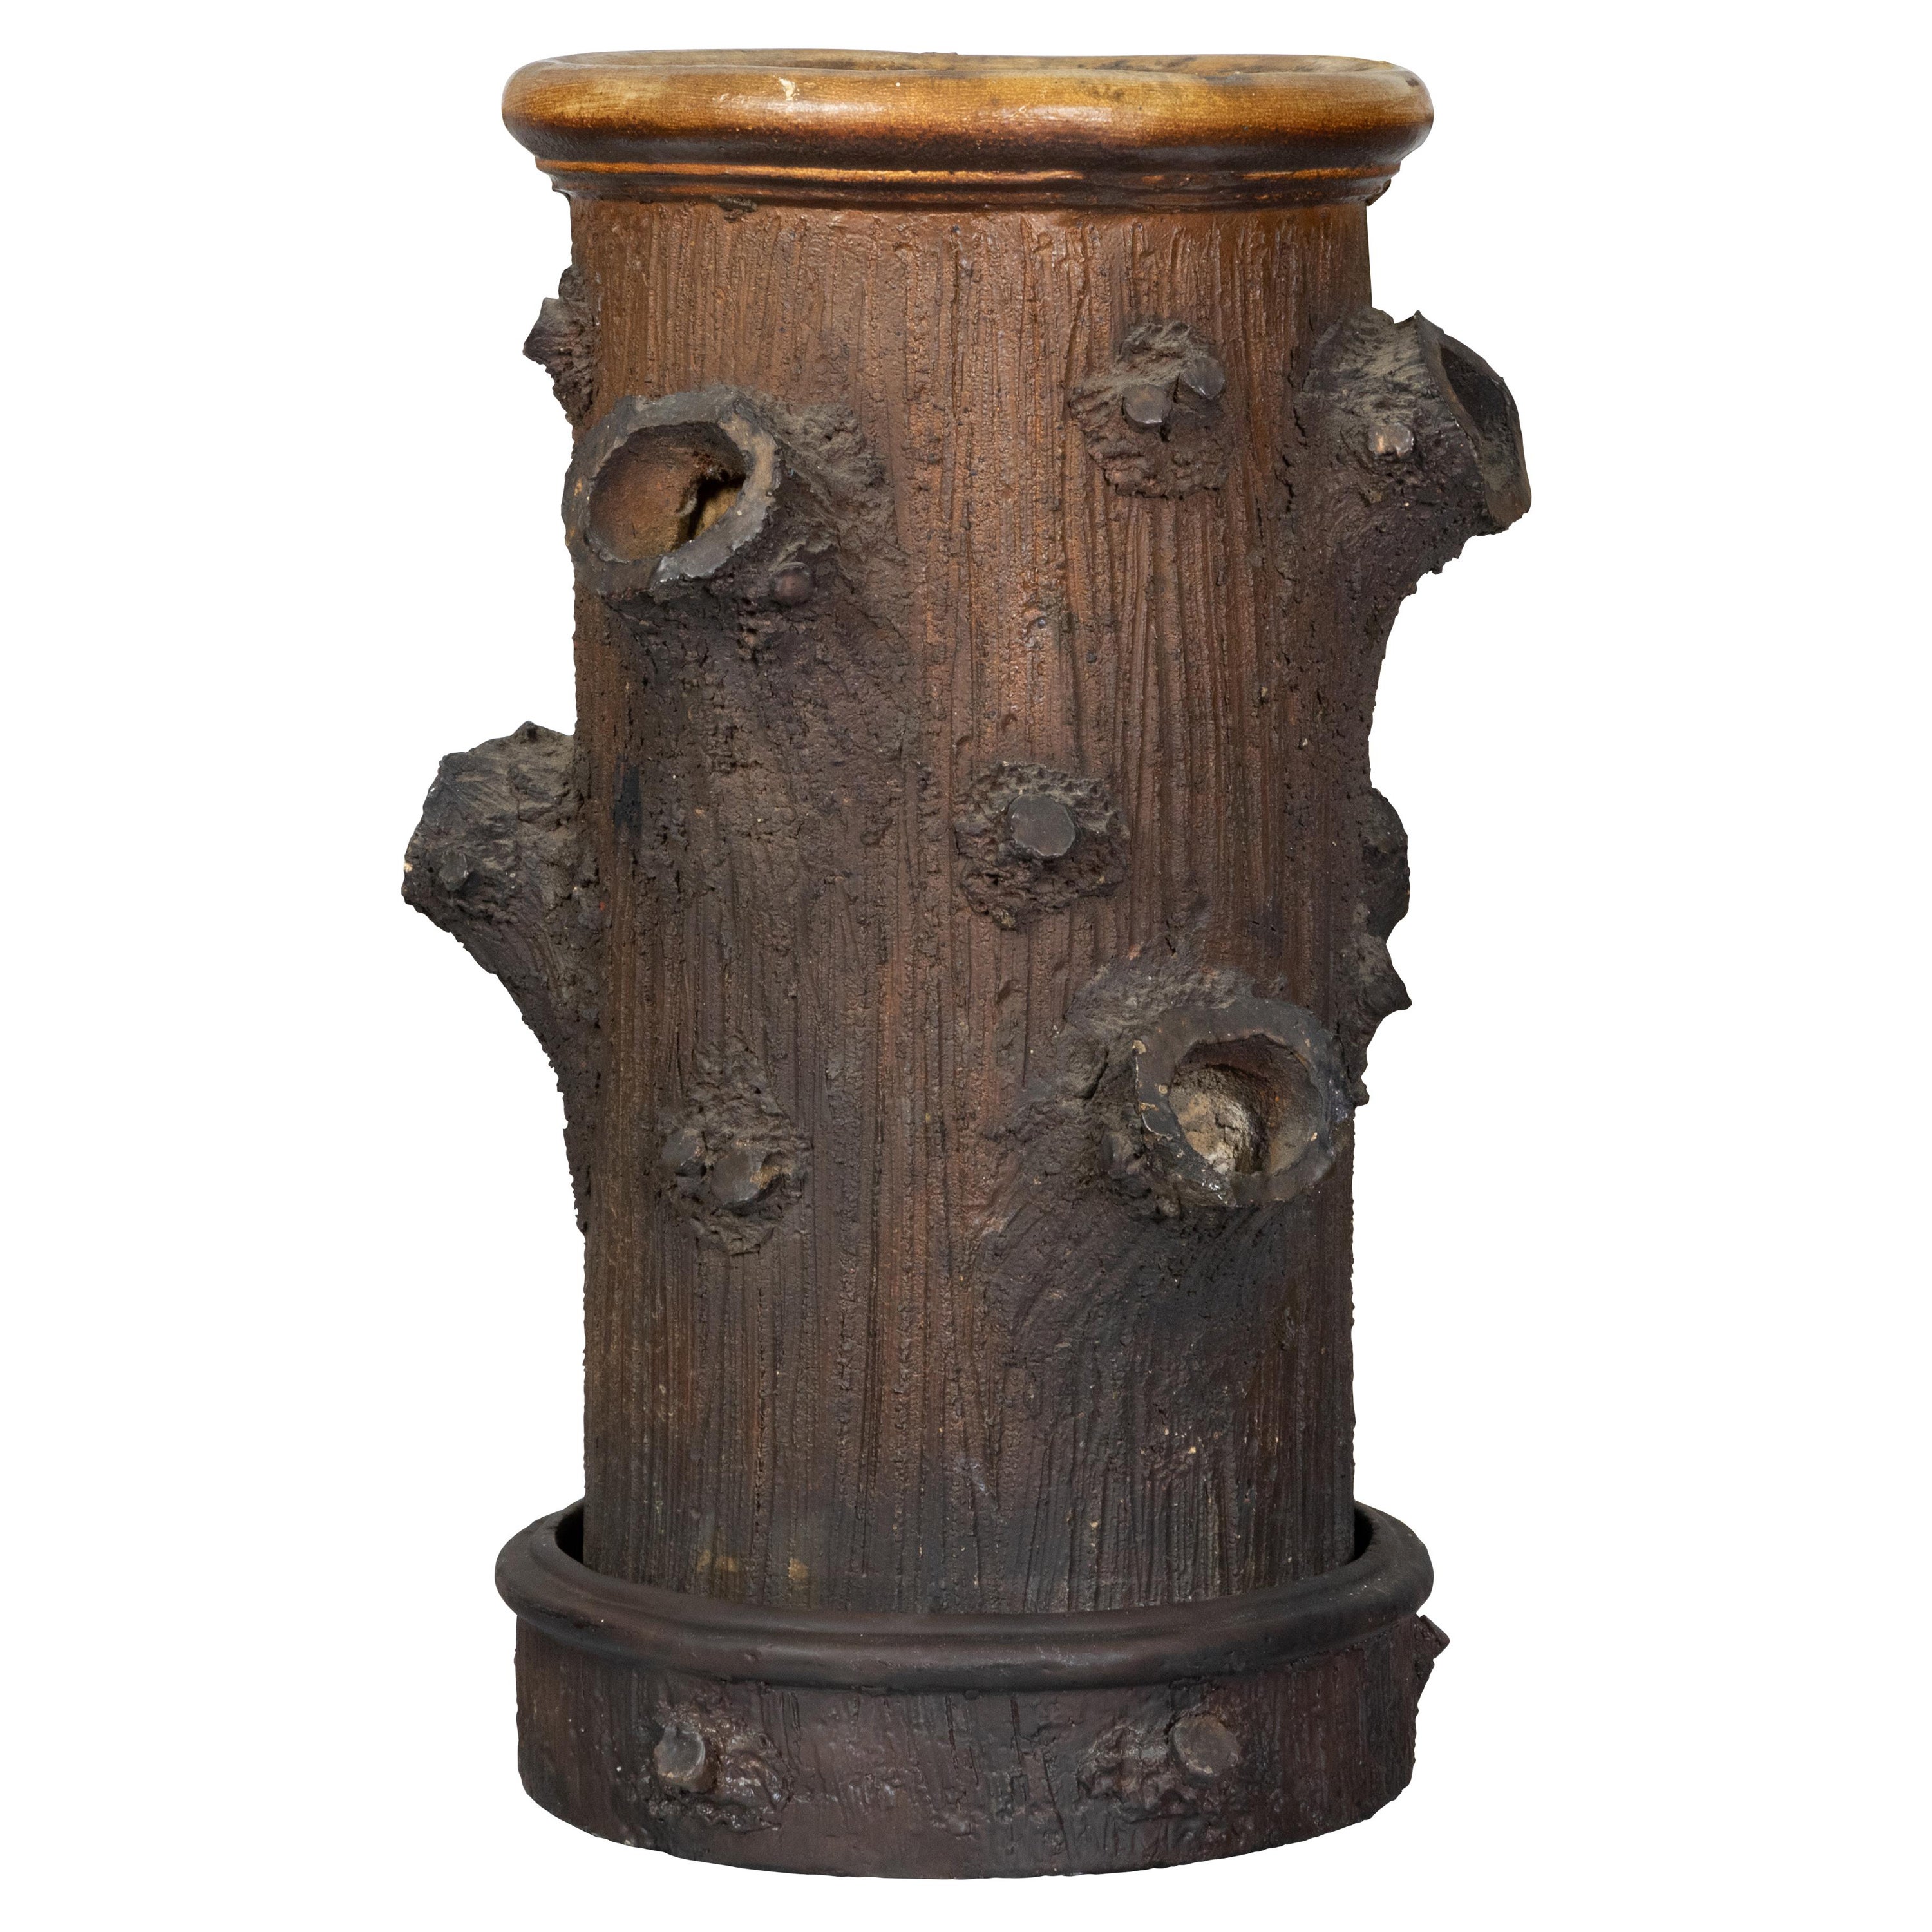 Rustic English Terracotta Faux Bois Umbrella Stand Depicting a Tree Trunk